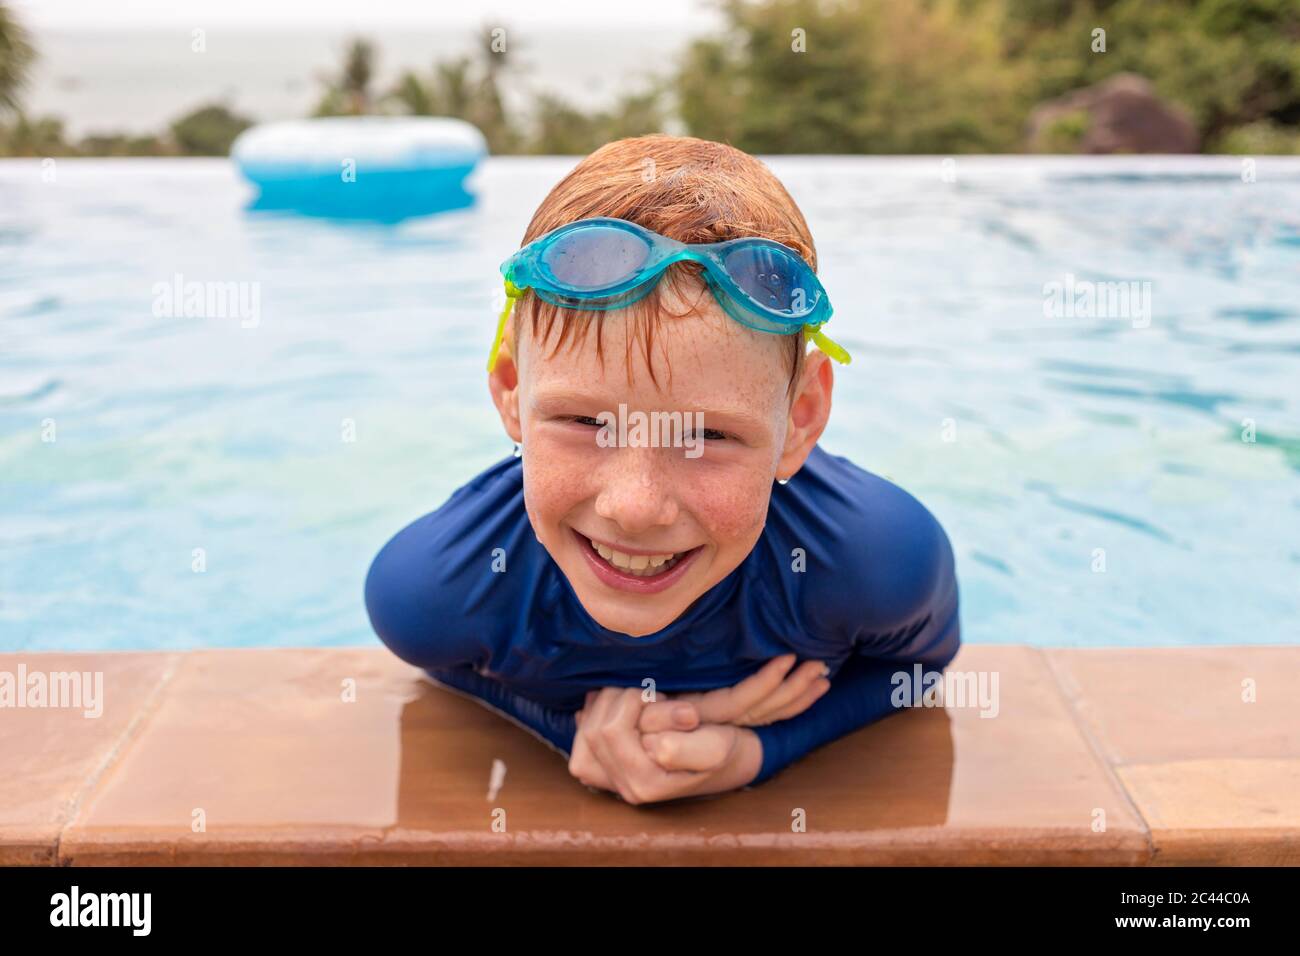 Close-up portrait of smiling boy playing in swimming pool, Thailand, Asia Stock Photo